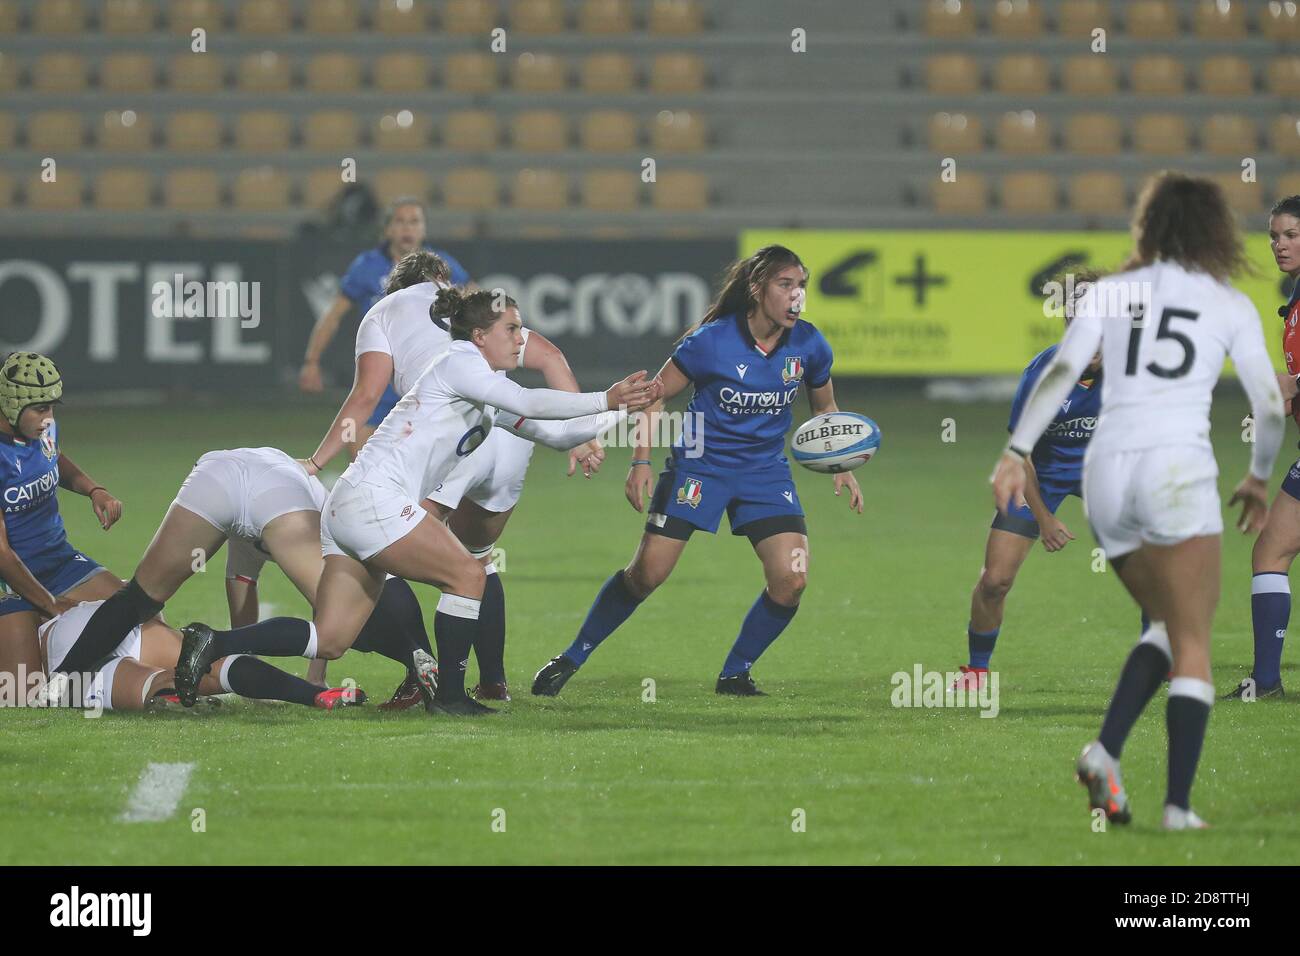 Parma, Italy. 1st Nov, 2020. parma, Italy, Sergio Lanfranchi stadium, 01 Nov 2020, Claudia Macdonald (England) passes the ball during Women 2020 - Italy vs England - Rugby Six Nations match - Credit: LM/Massimiliano Carnabuci Credit: Massimiliano Carnabuci/LPS/ZUMA Wire/Alamy Live News Stock Photo